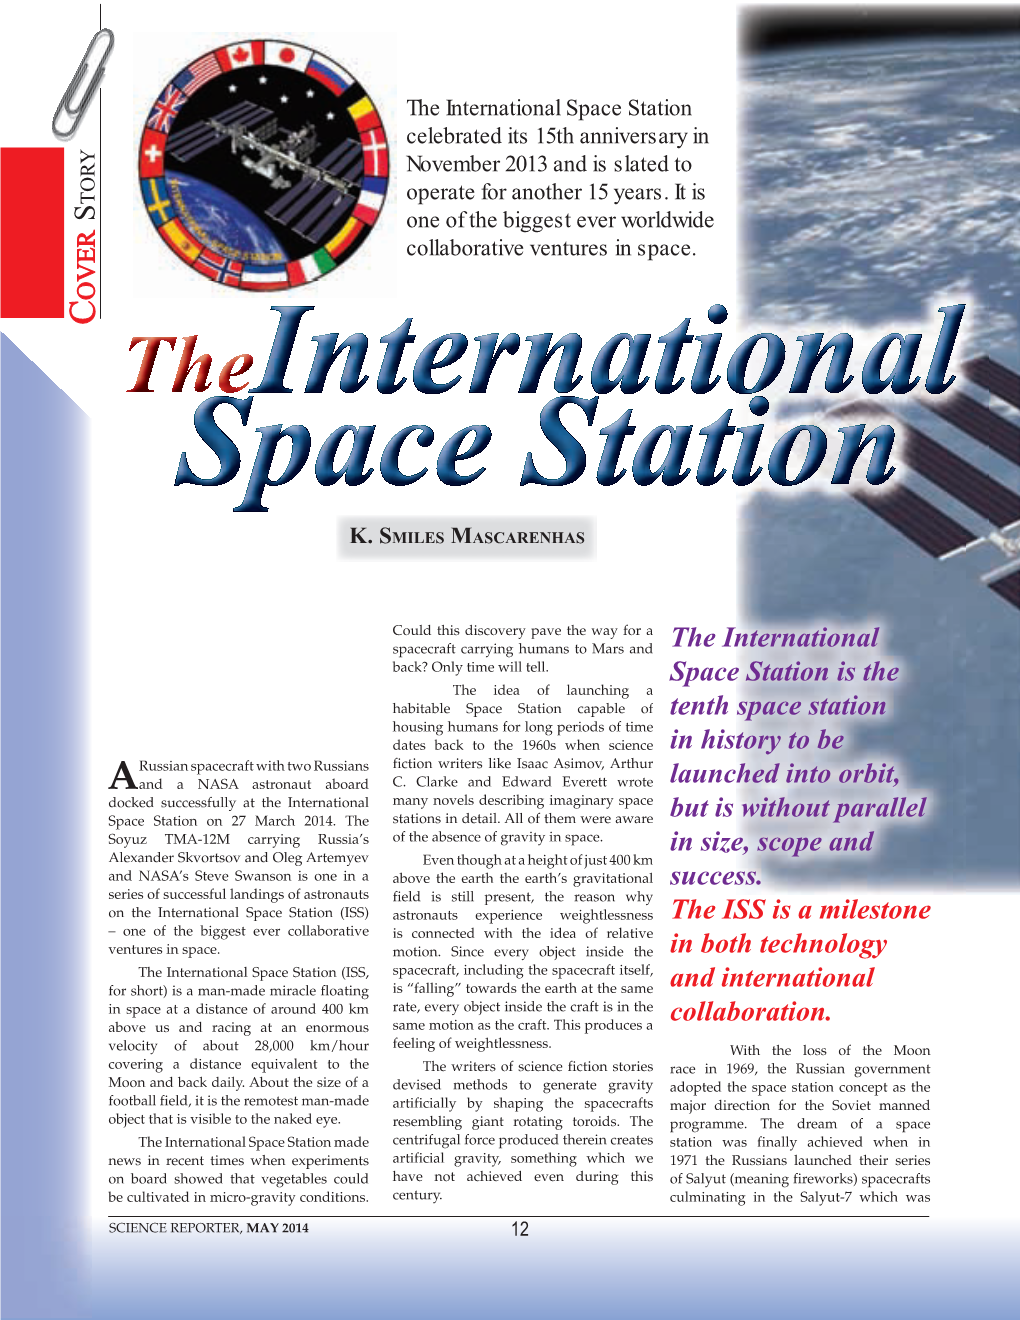 The International Space Station Is the Tenth Space Station in History to Be